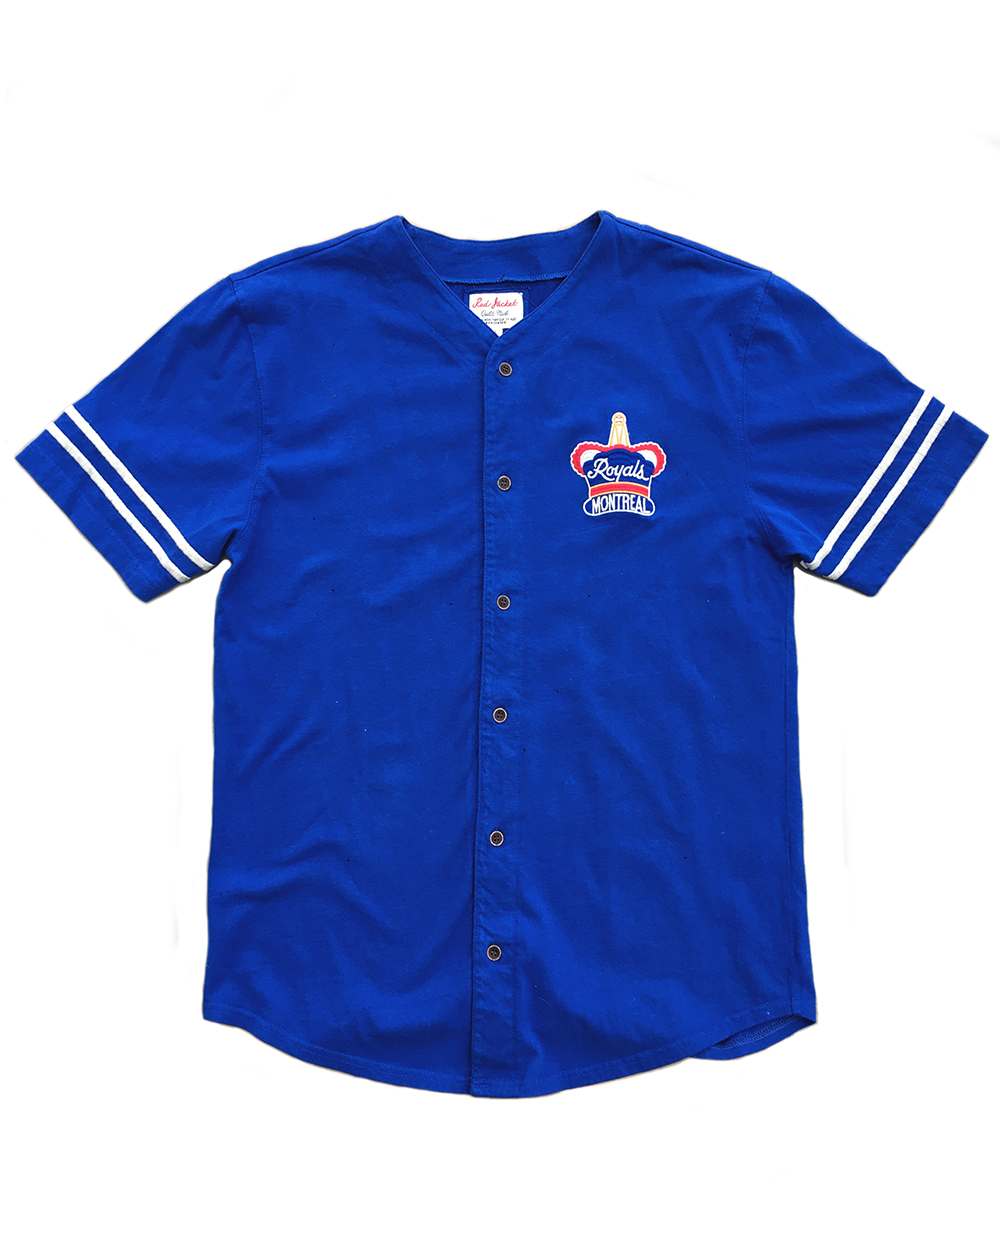 The Coolest Montreal Royals Apparel: Exclusive and Vintage